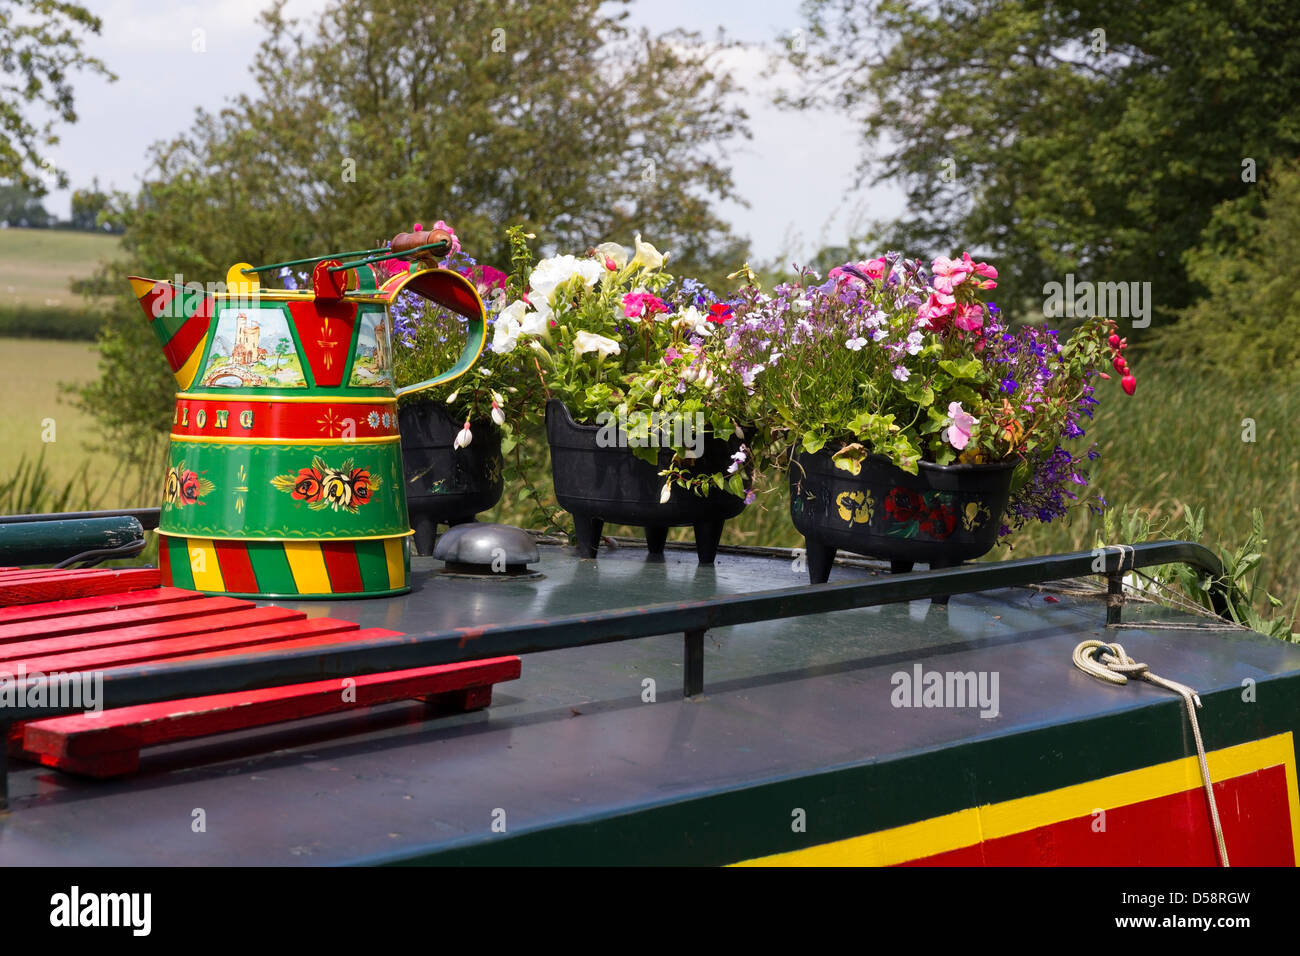 Brightly barge painted metal bucket and flowers on longboat roof, Foxton Locks, Market Harborough, Leicestershire, England, UK Stock Photo